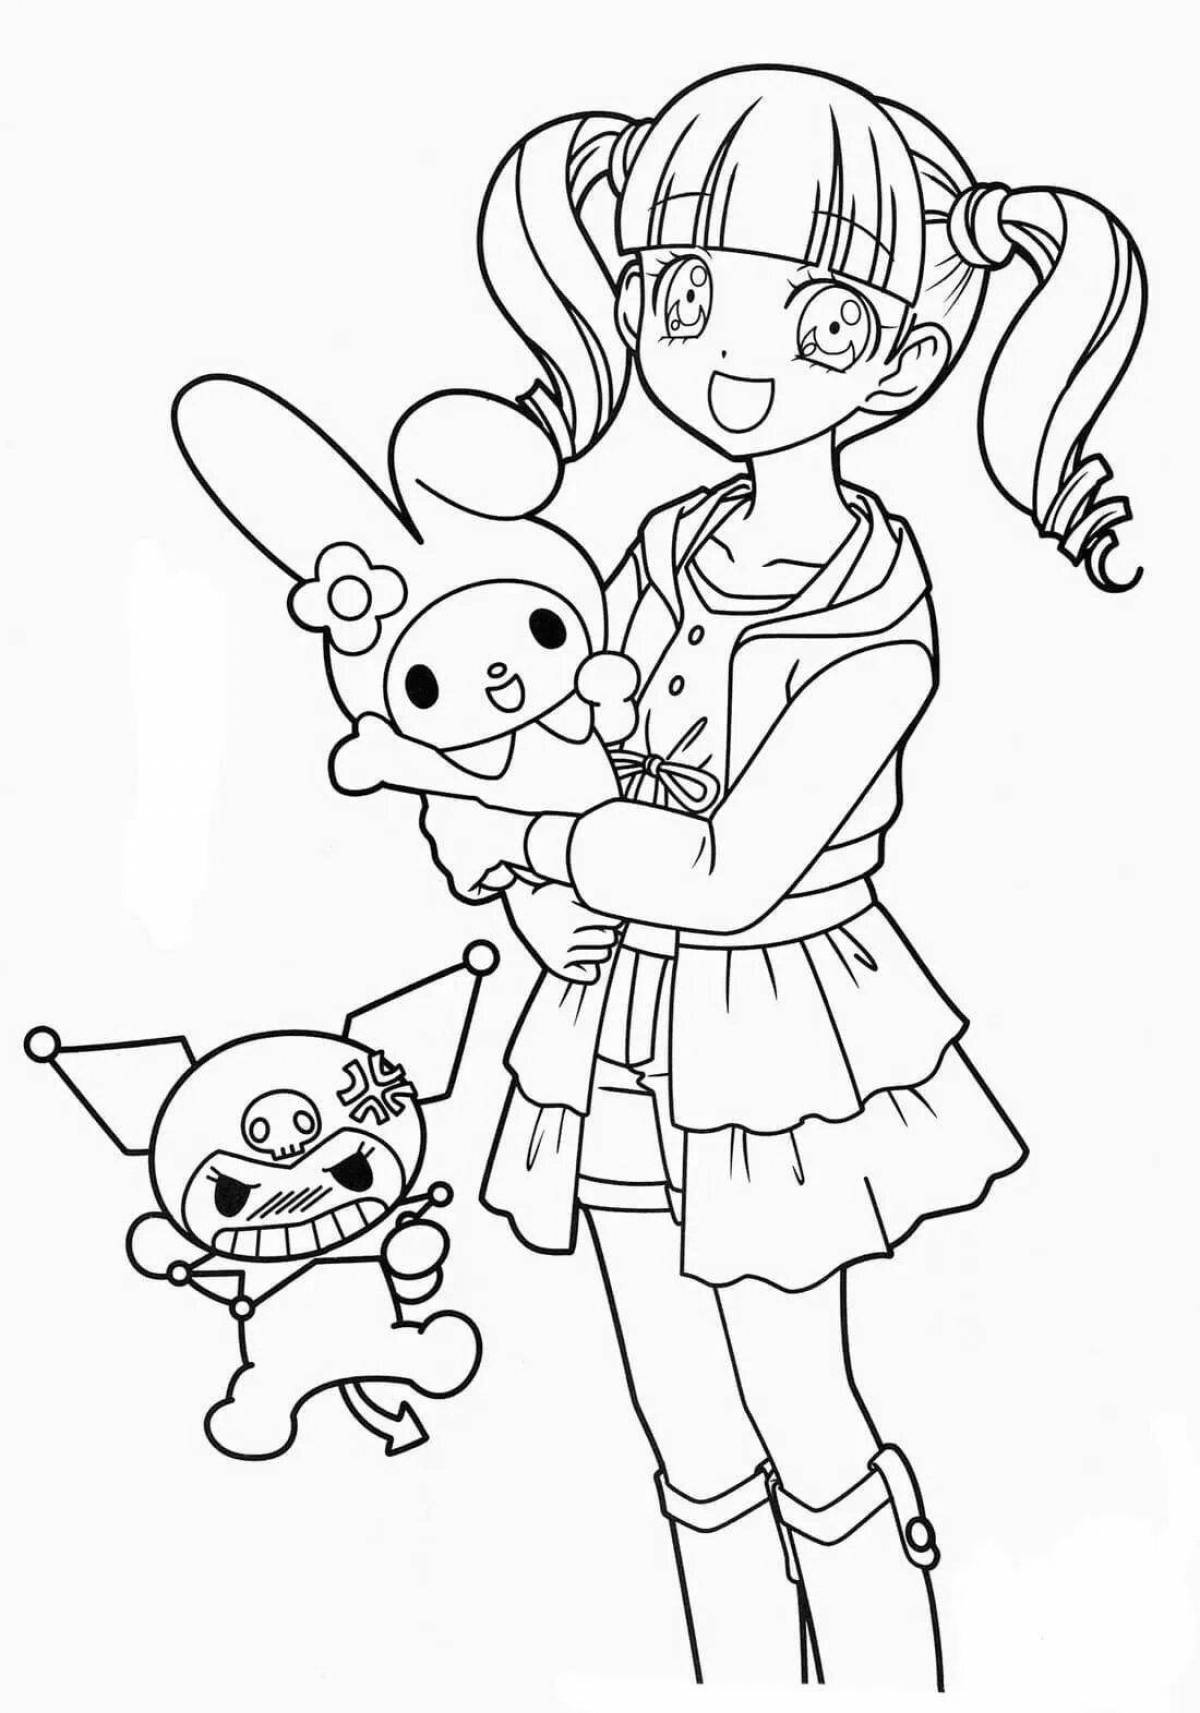 Fascinating kuromi and melody coloring page